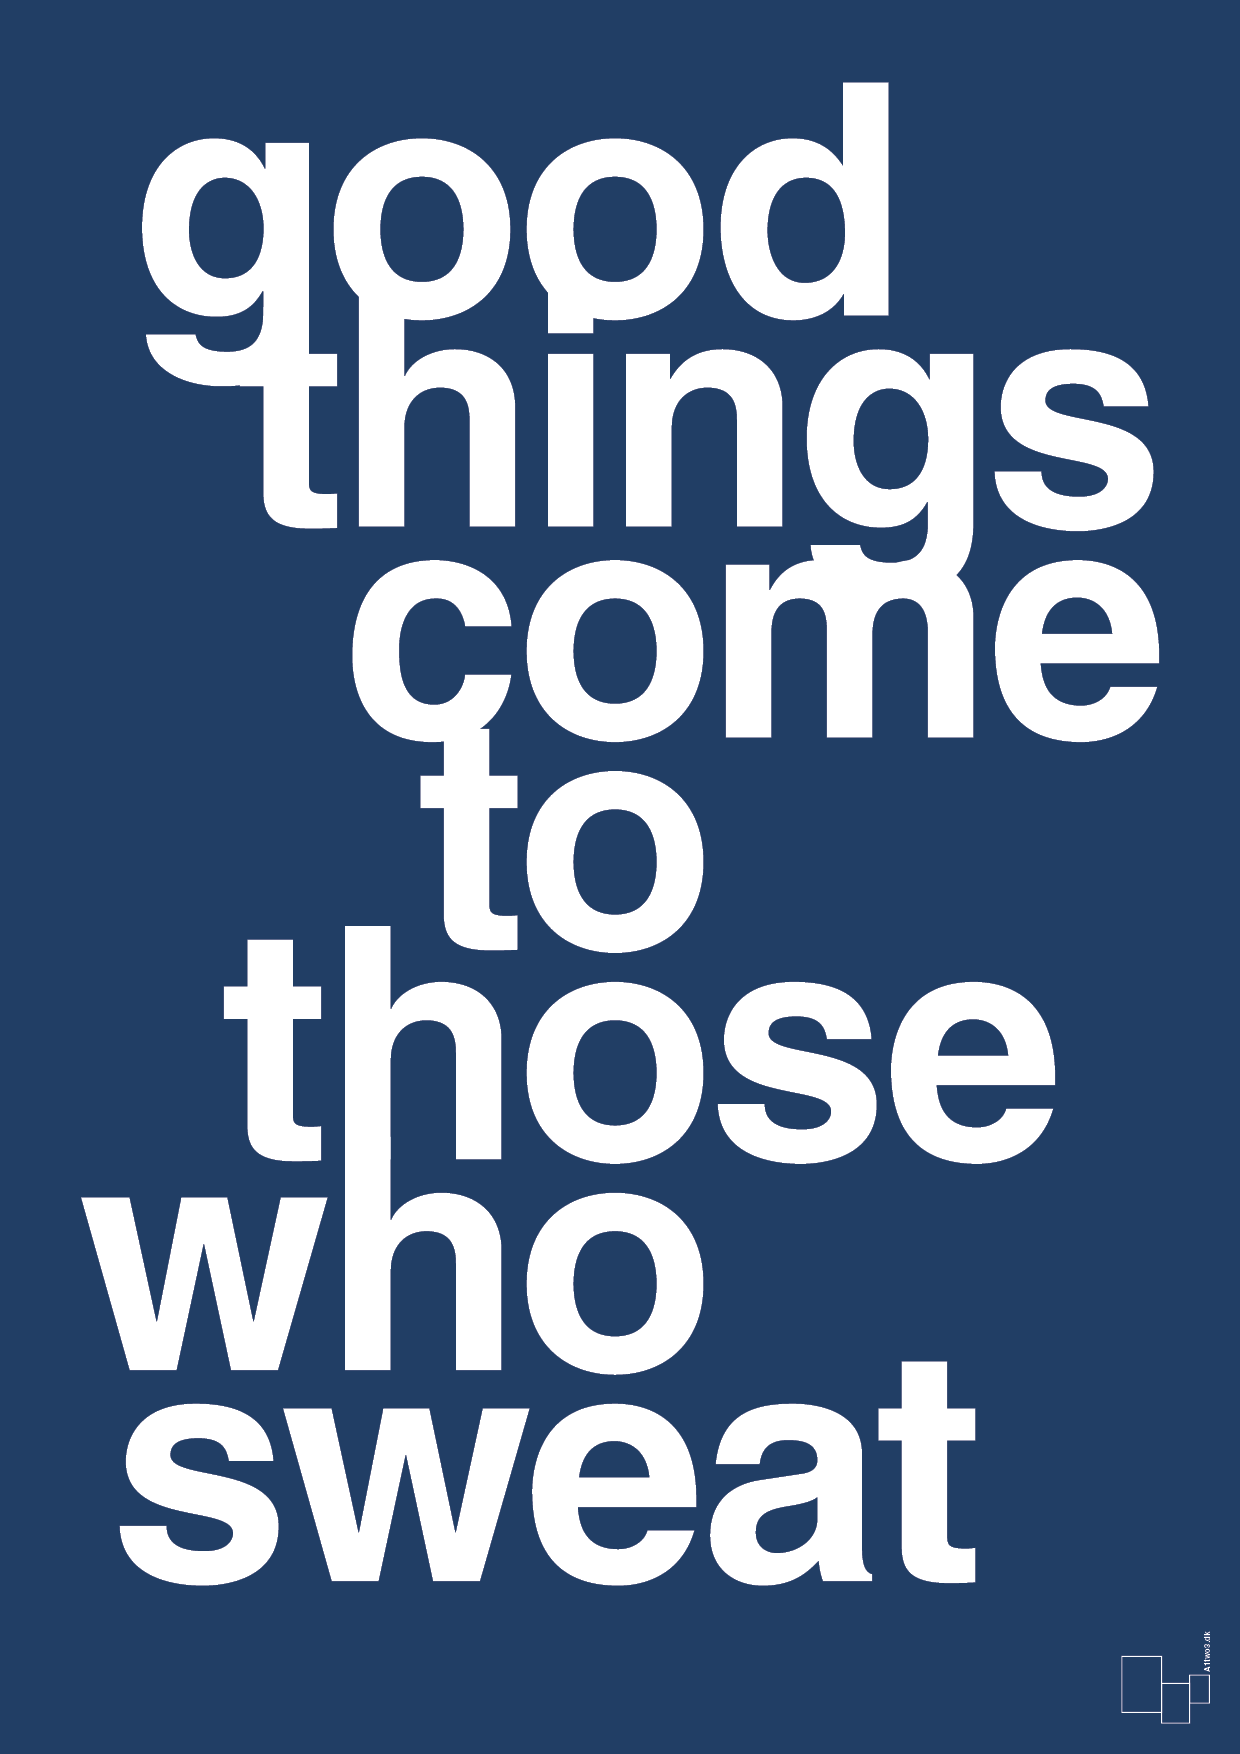 good things come to those who sweat - Plakat med Sport & Fritid i Lapis Blue